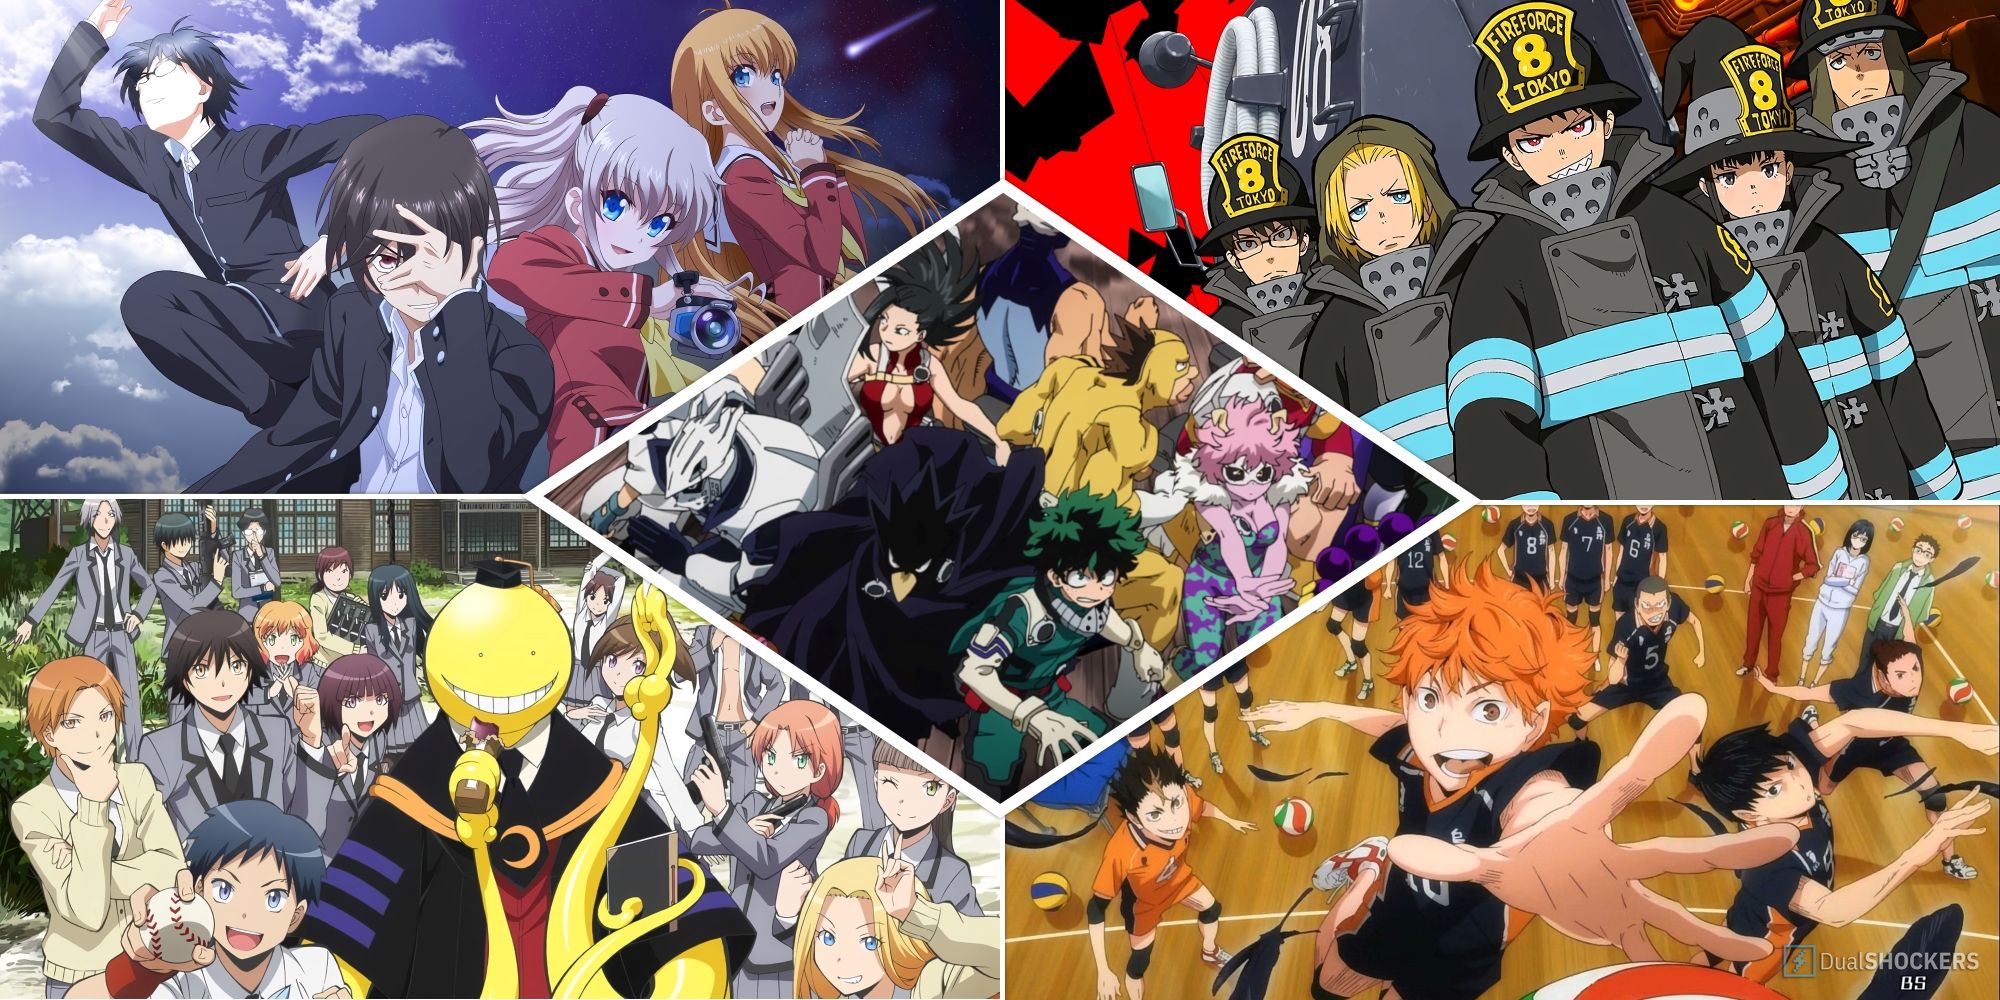 A Collage With The Casts Of My Hero Academia; Fire Force, Haikyuu!!, Assassination Classroom, And Charlotte